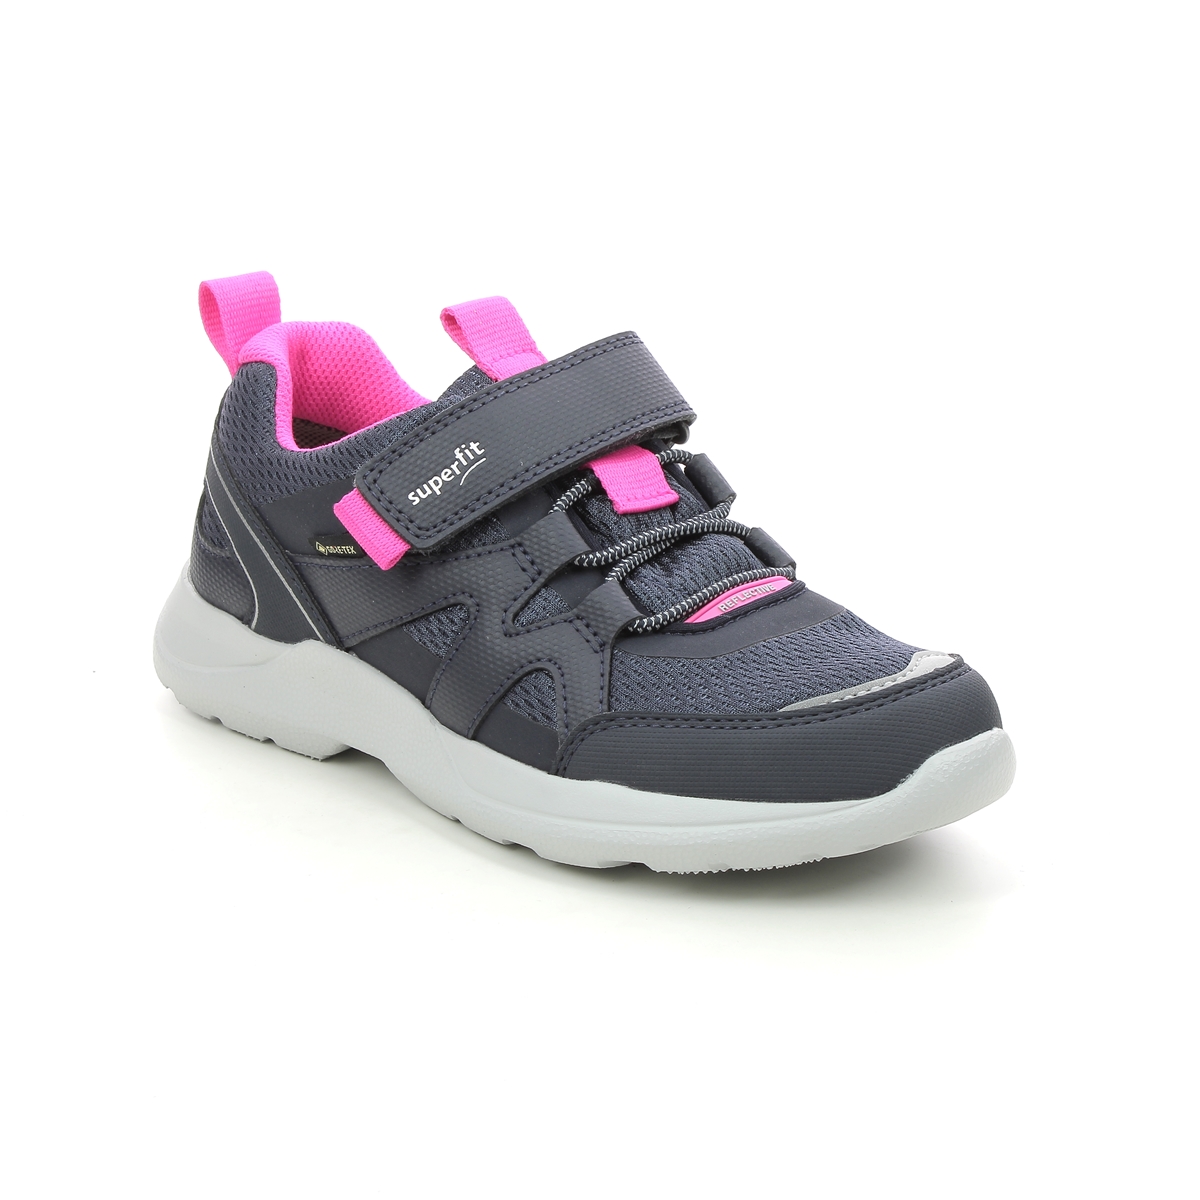 Superfit Rush Jnr G Gtx Navy Pink Kids Girls Trainers 1006219-8020 In Size 36 In Plain Navy Pink For kids